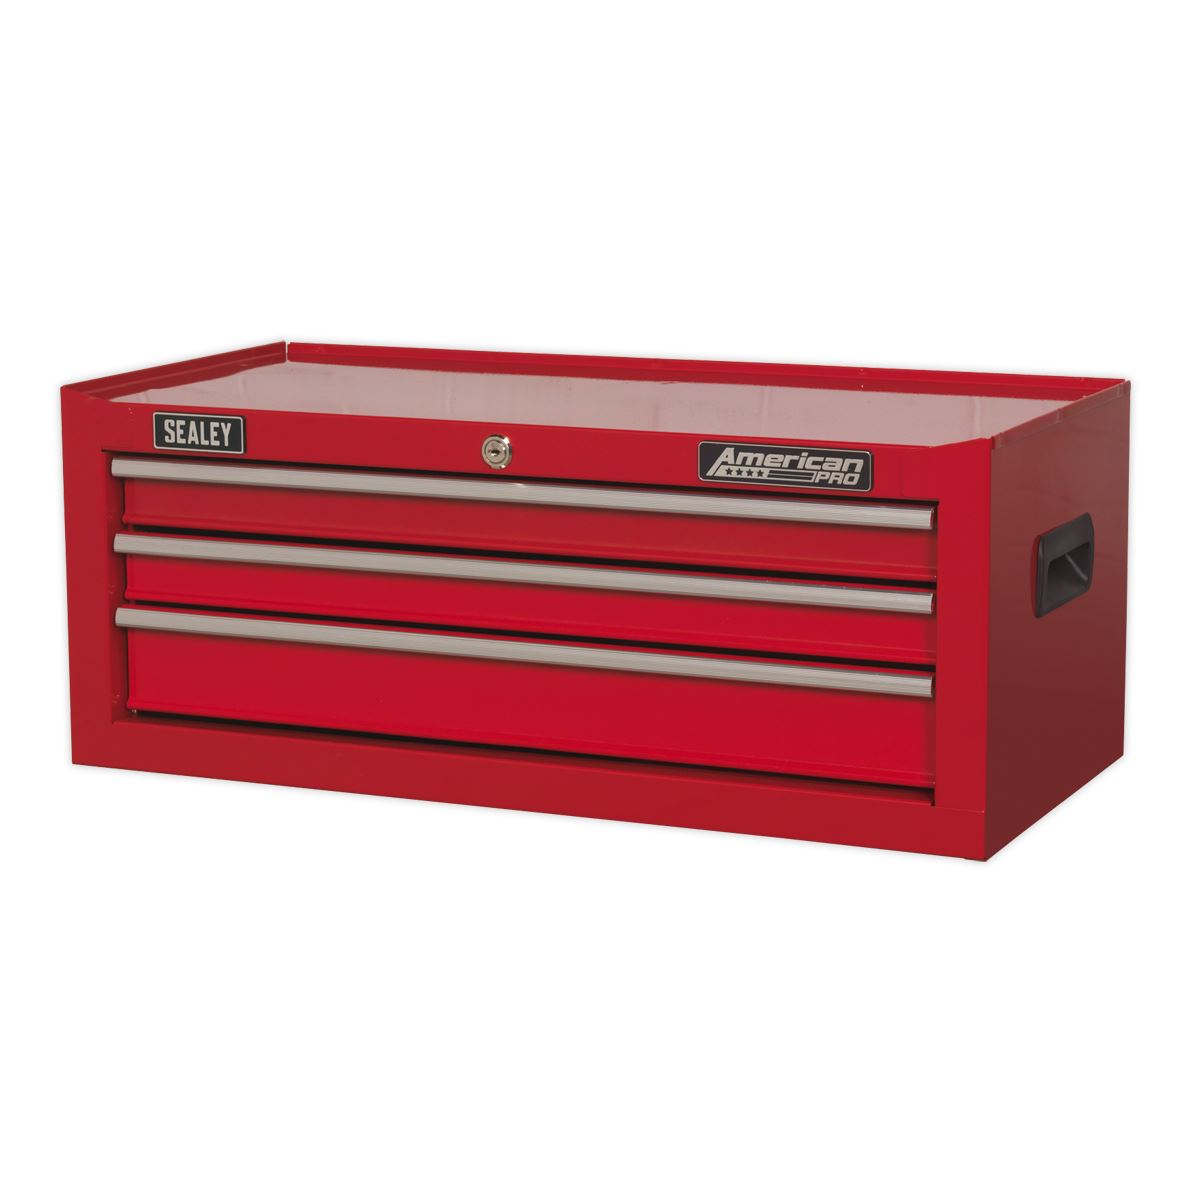 Sealey American Pro Mid-Box Tool Chest 3 Drawer with Ball-Bearing Slides - Red